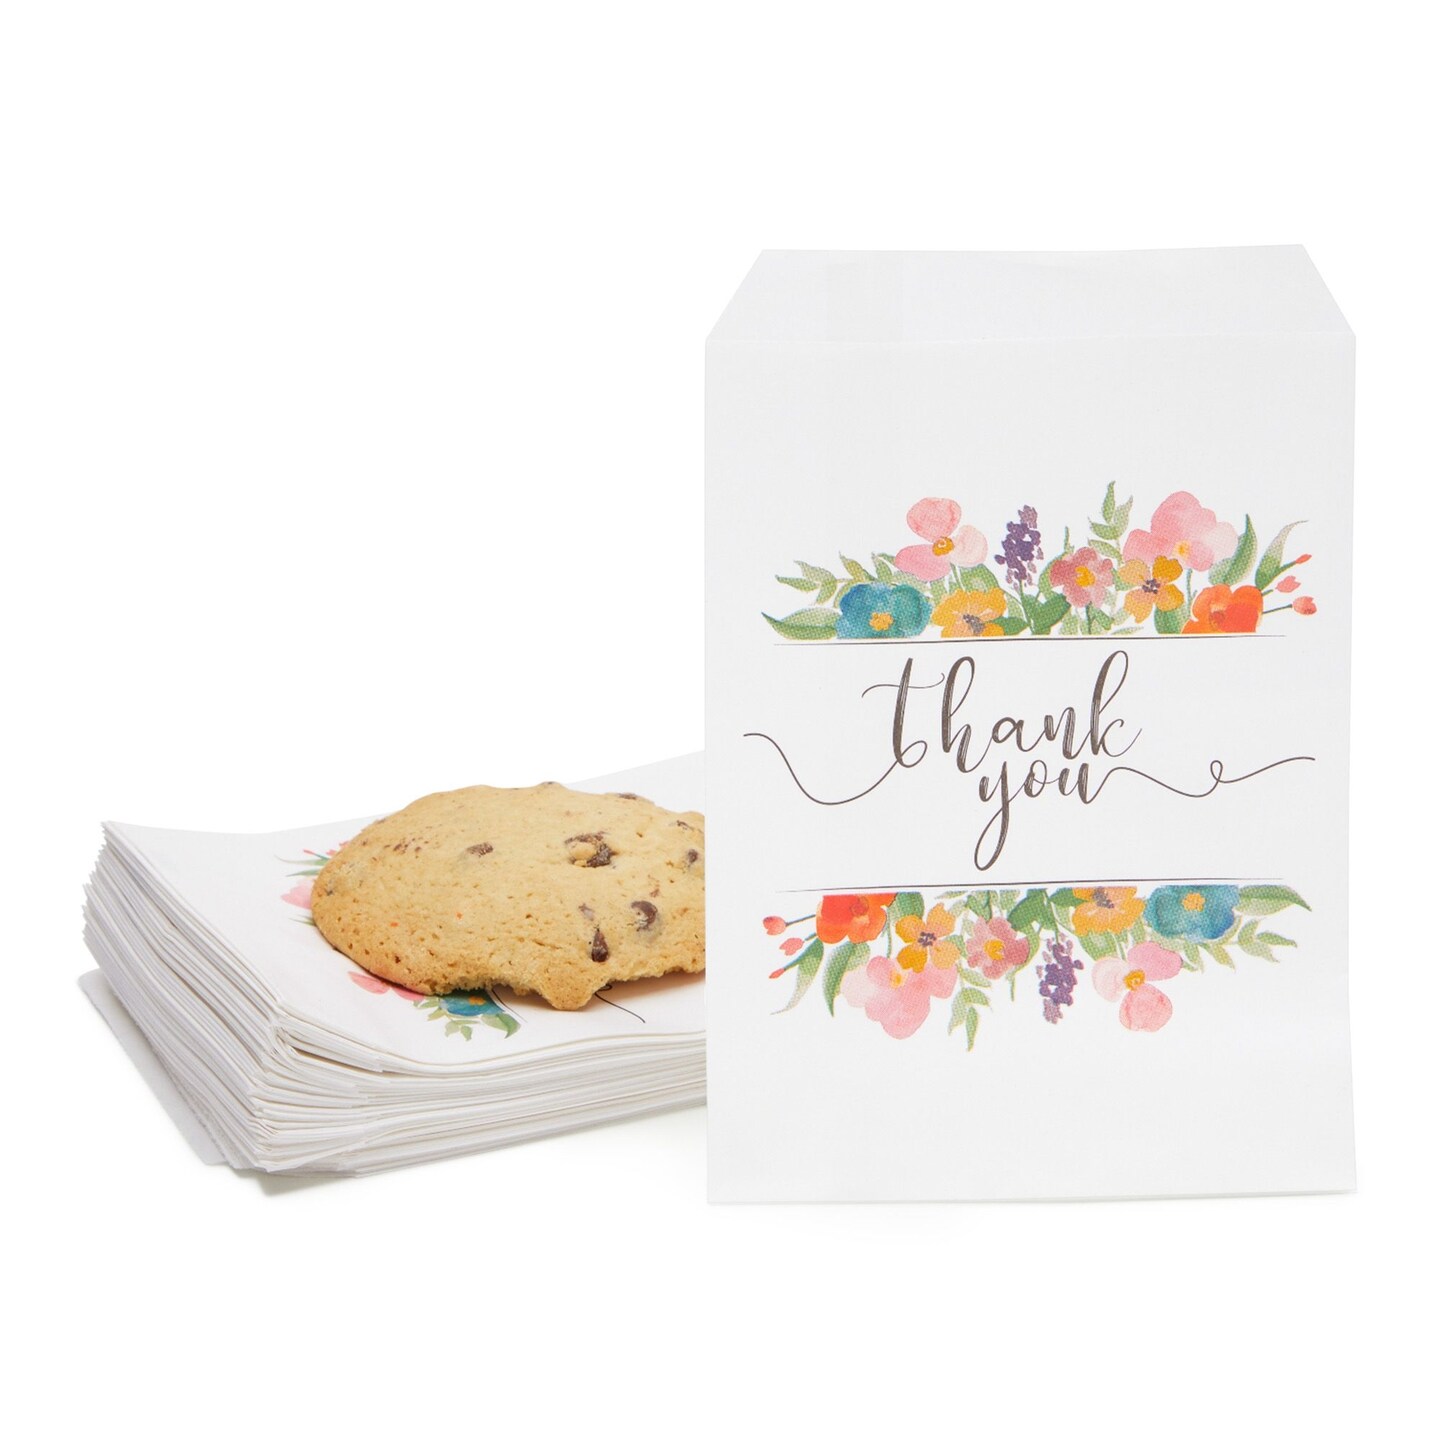 100 Pack Paper Cookie Bags, 5 x 7 Inch for Party Favors, Treats, Candy, Wedding, Individual Bag with Floral Thank You Design, Mini Gift Bags for Snacks, Goodies